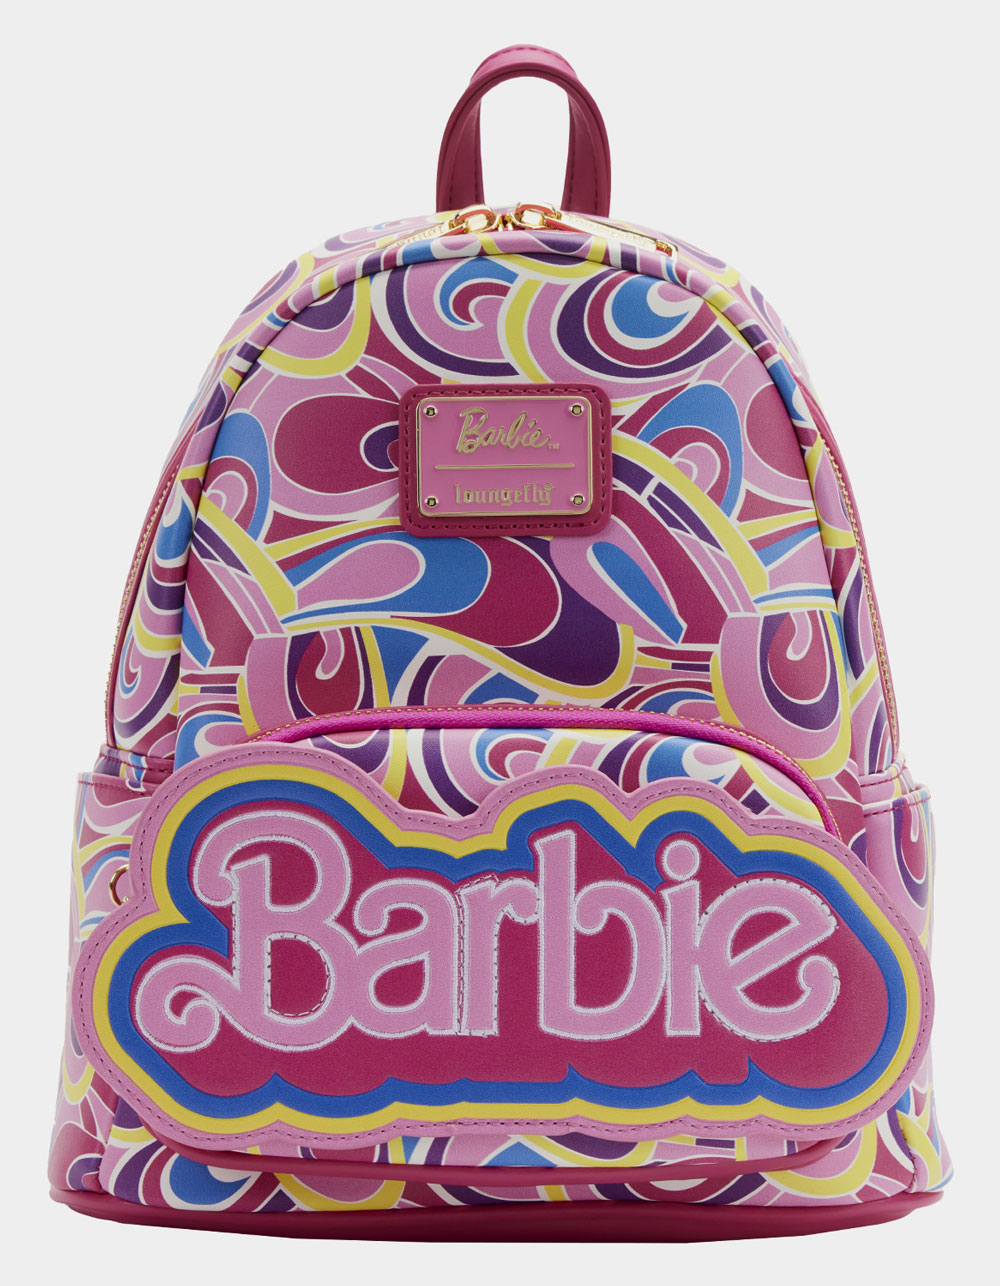 Barbie 5 Piece Backpack & Lunch Box Set